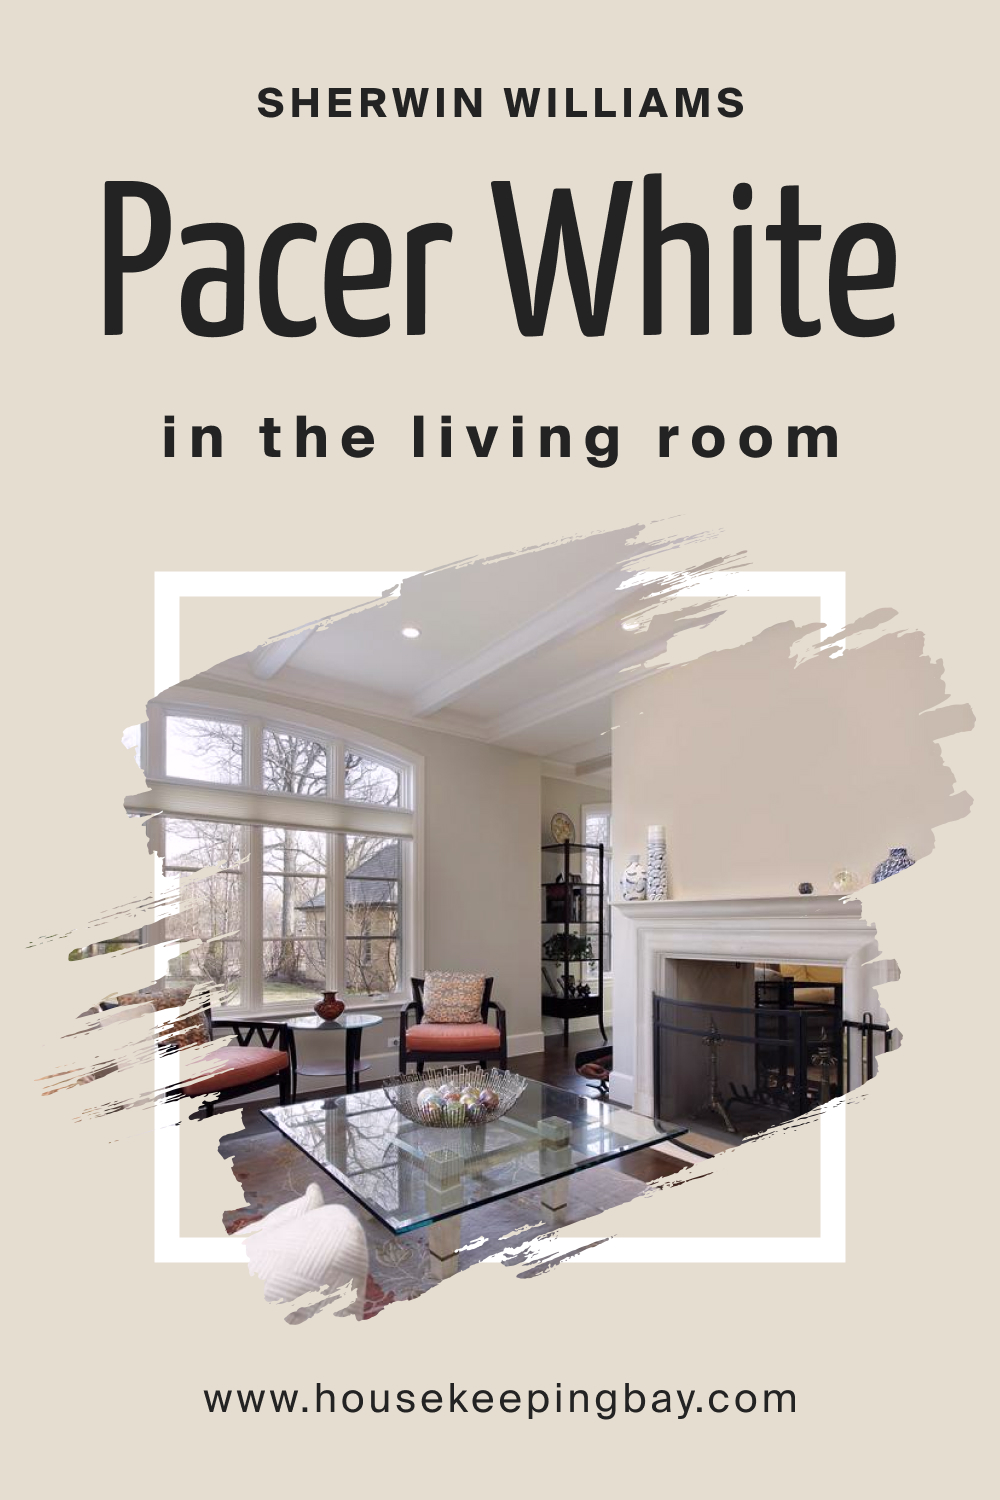 Sherwin Williams. SW Pacer White In the Living Room